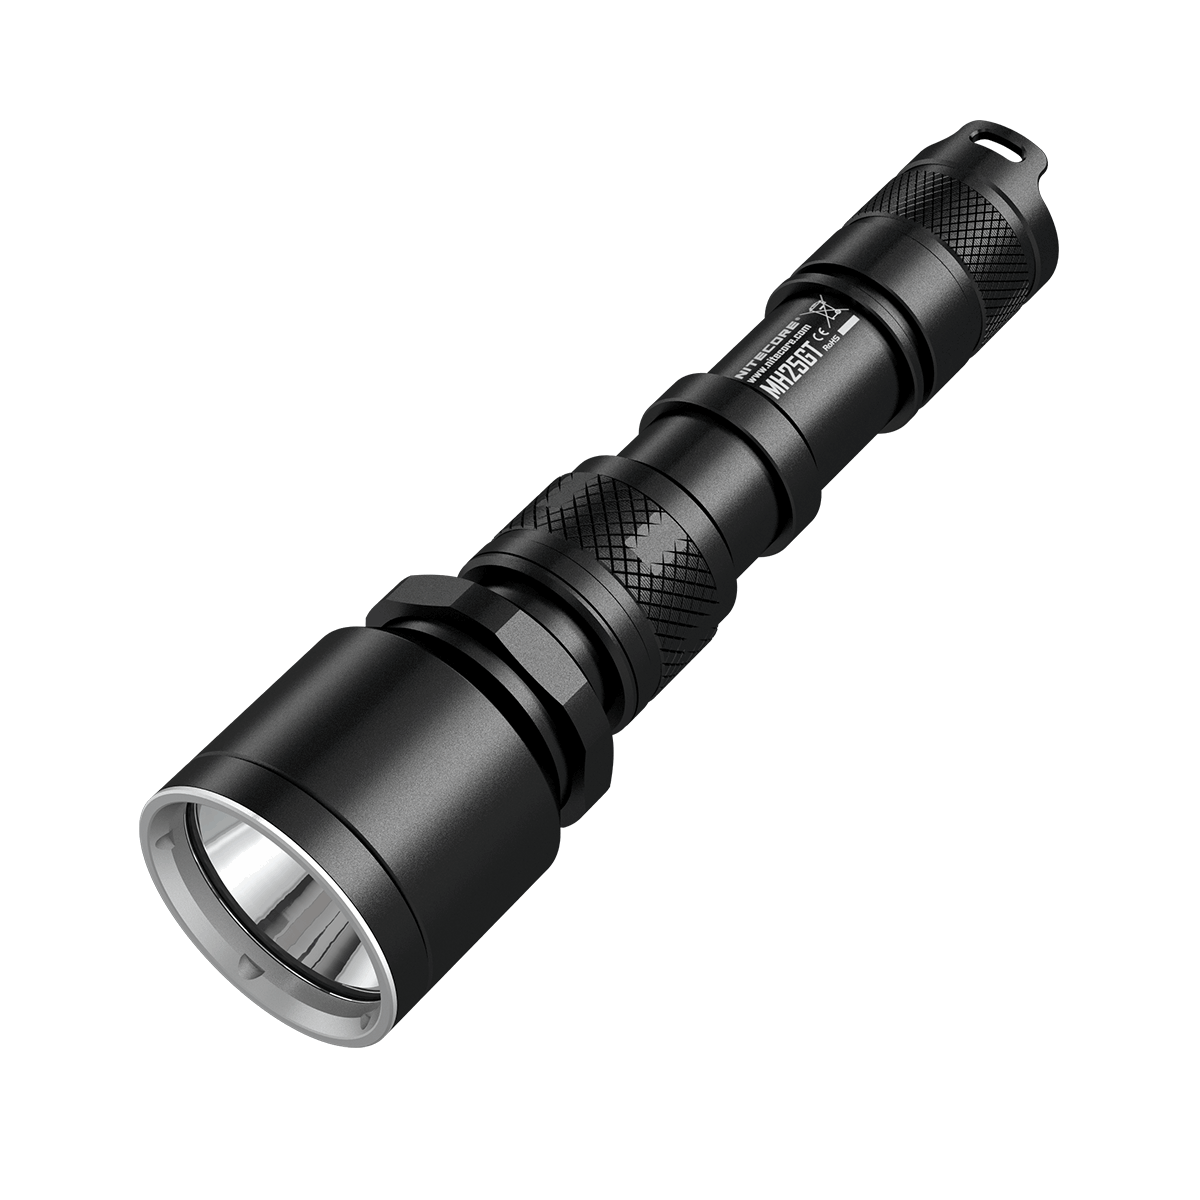 1000 Lumens Nitecore MH25GT Multitask Hybrid Rechargeable LED Torch